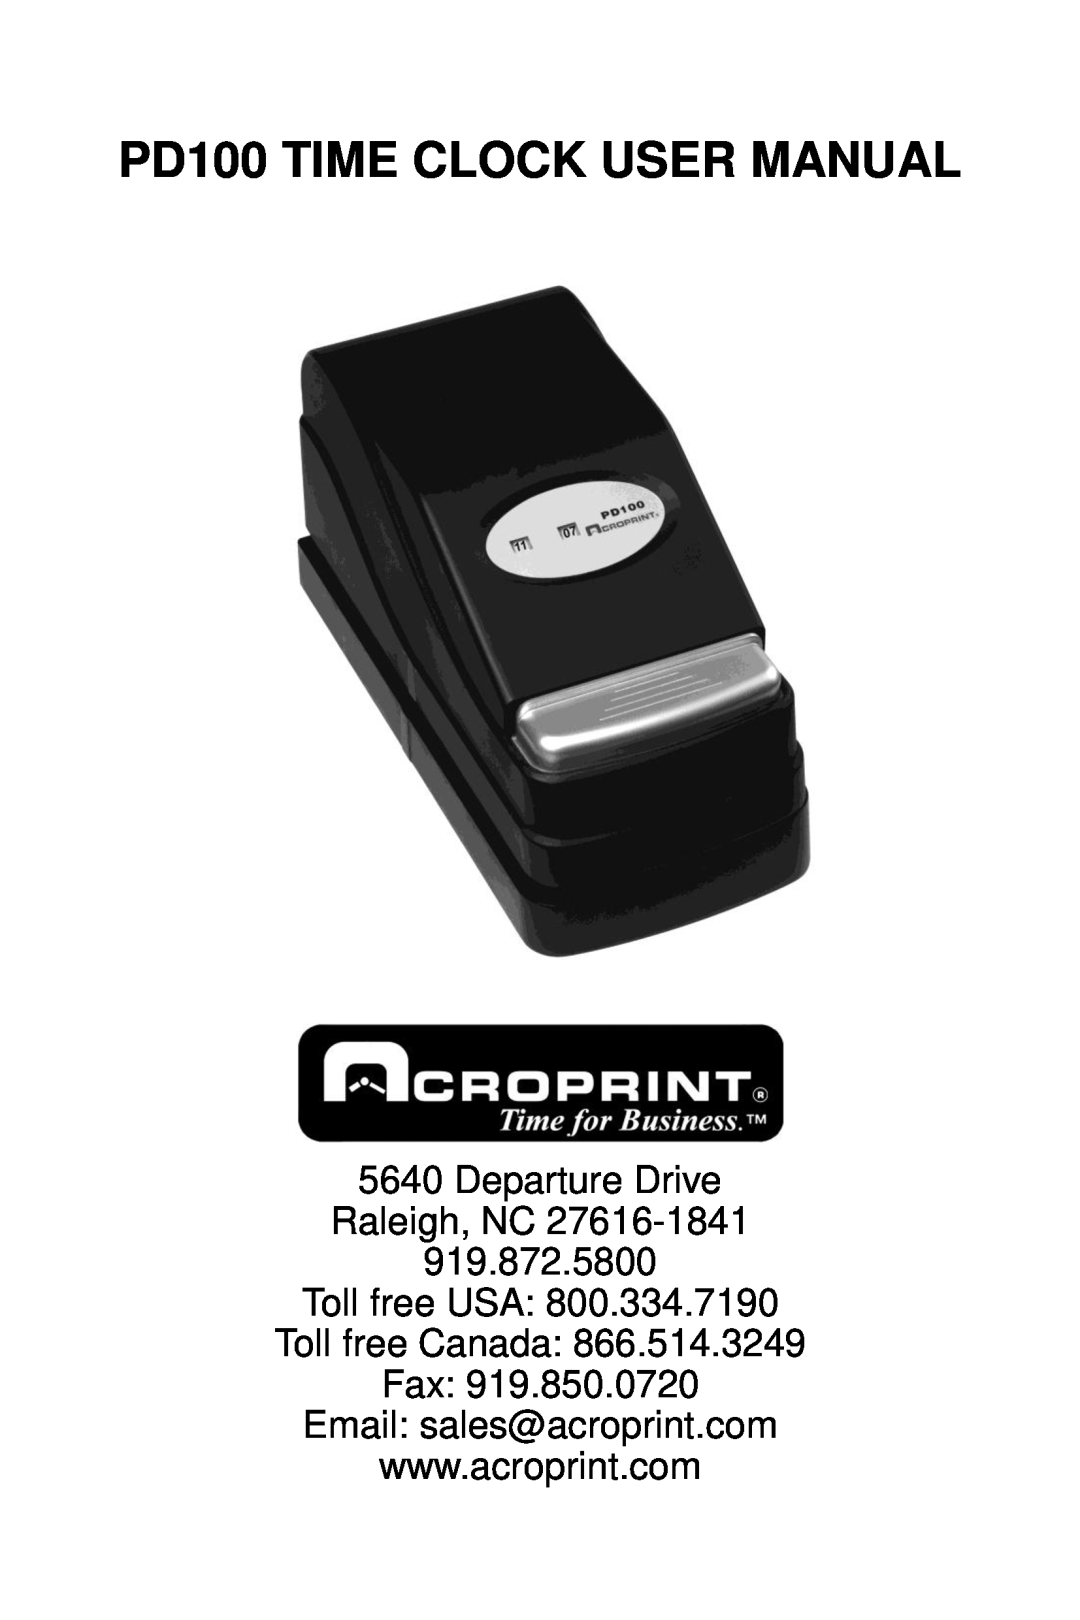 Acroprint user manual Departure Drive Raleigh, NC 919.872.5800 Toll free USA, PD100 TIME CLOCK USER MANUAL 